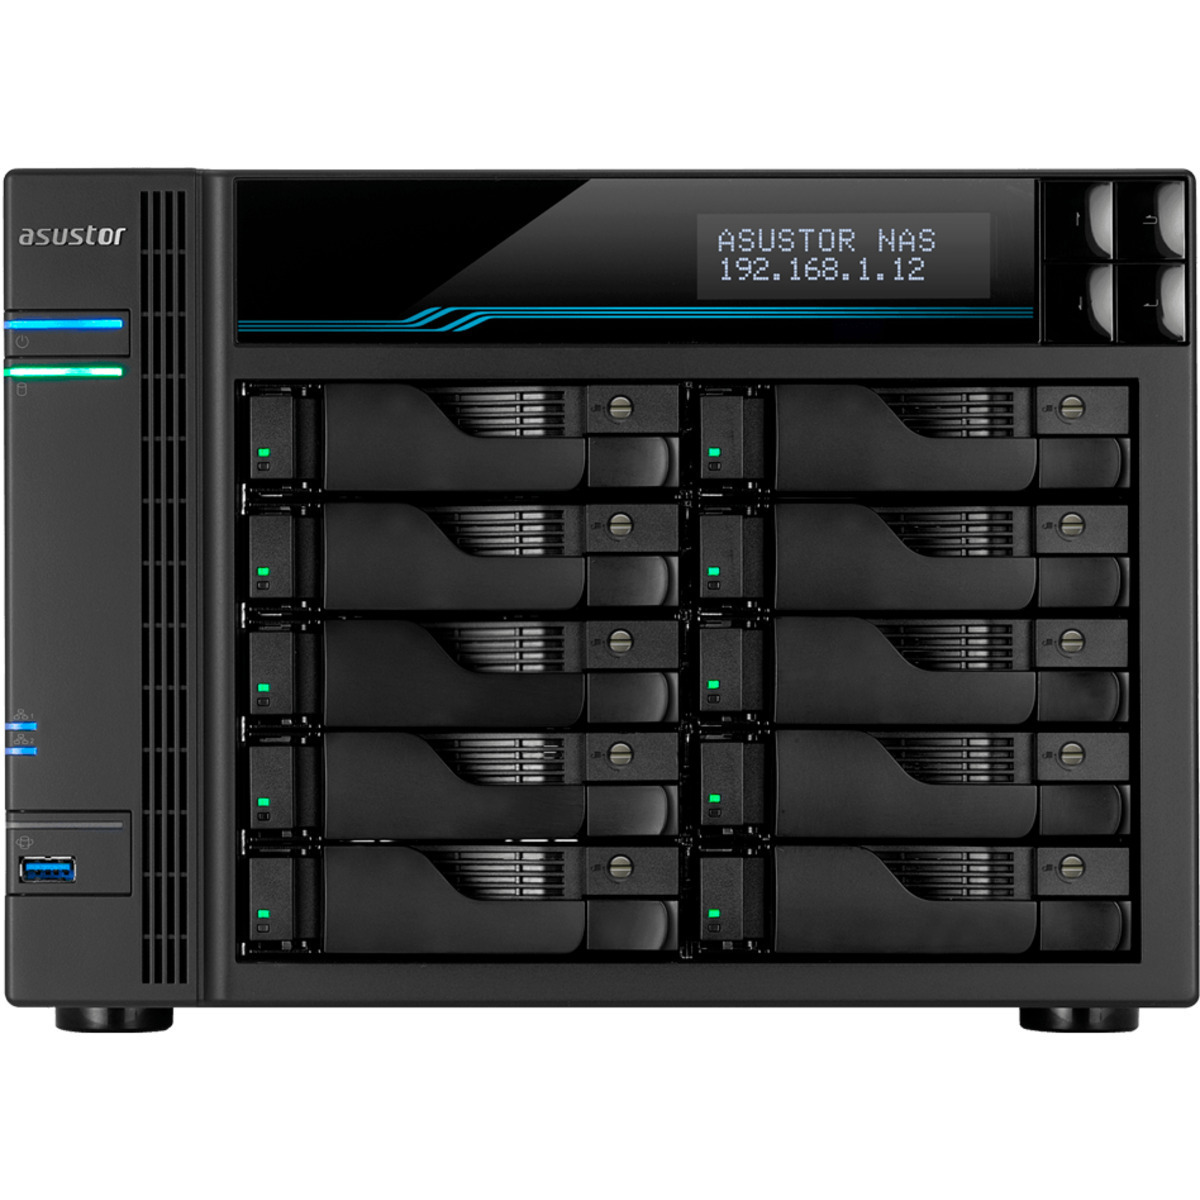 ASUSTOR AS6510T Lockerstor 10 90tb 10-Bay Desktop Multimedia / Power User / Business NAS - Network Attached Storage Device 9x10tb Seagate IronWolf Pro ST10000NT001 3.5 7200rpm SATA 6Gb/s HDD NAS Class Drives Installed - Burn-In Tested - ON SALE - FREE RAM UPGRADE AS6510T Lockerstor 10